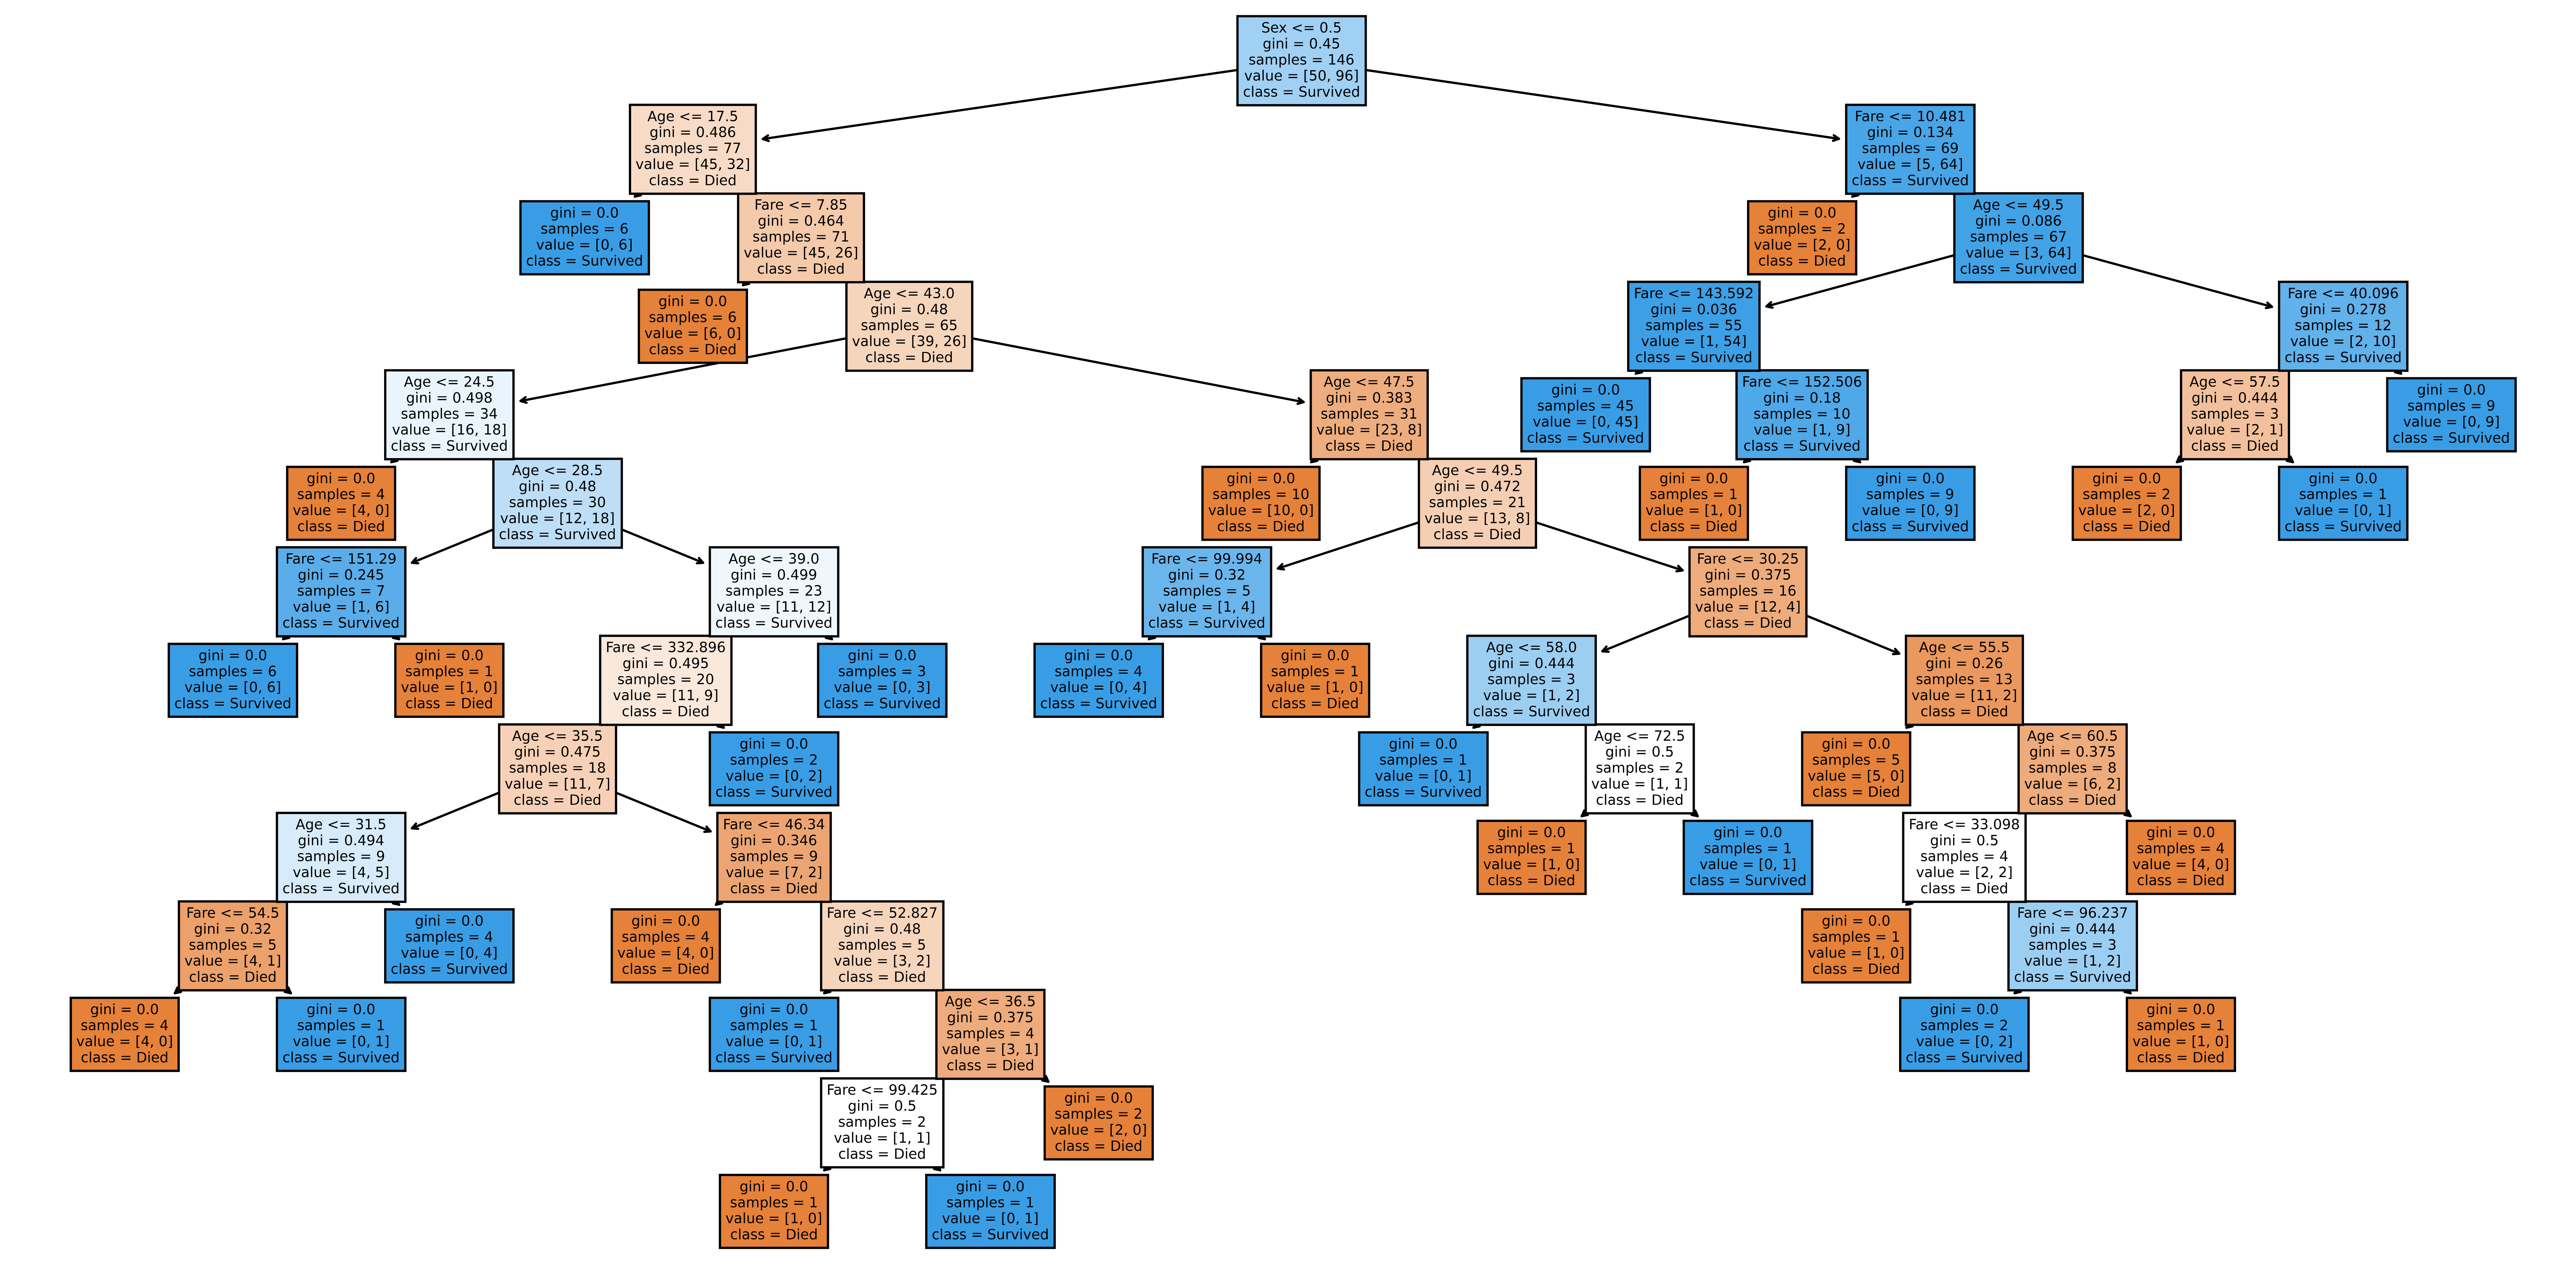 Decision Tree trained on the Titanic data